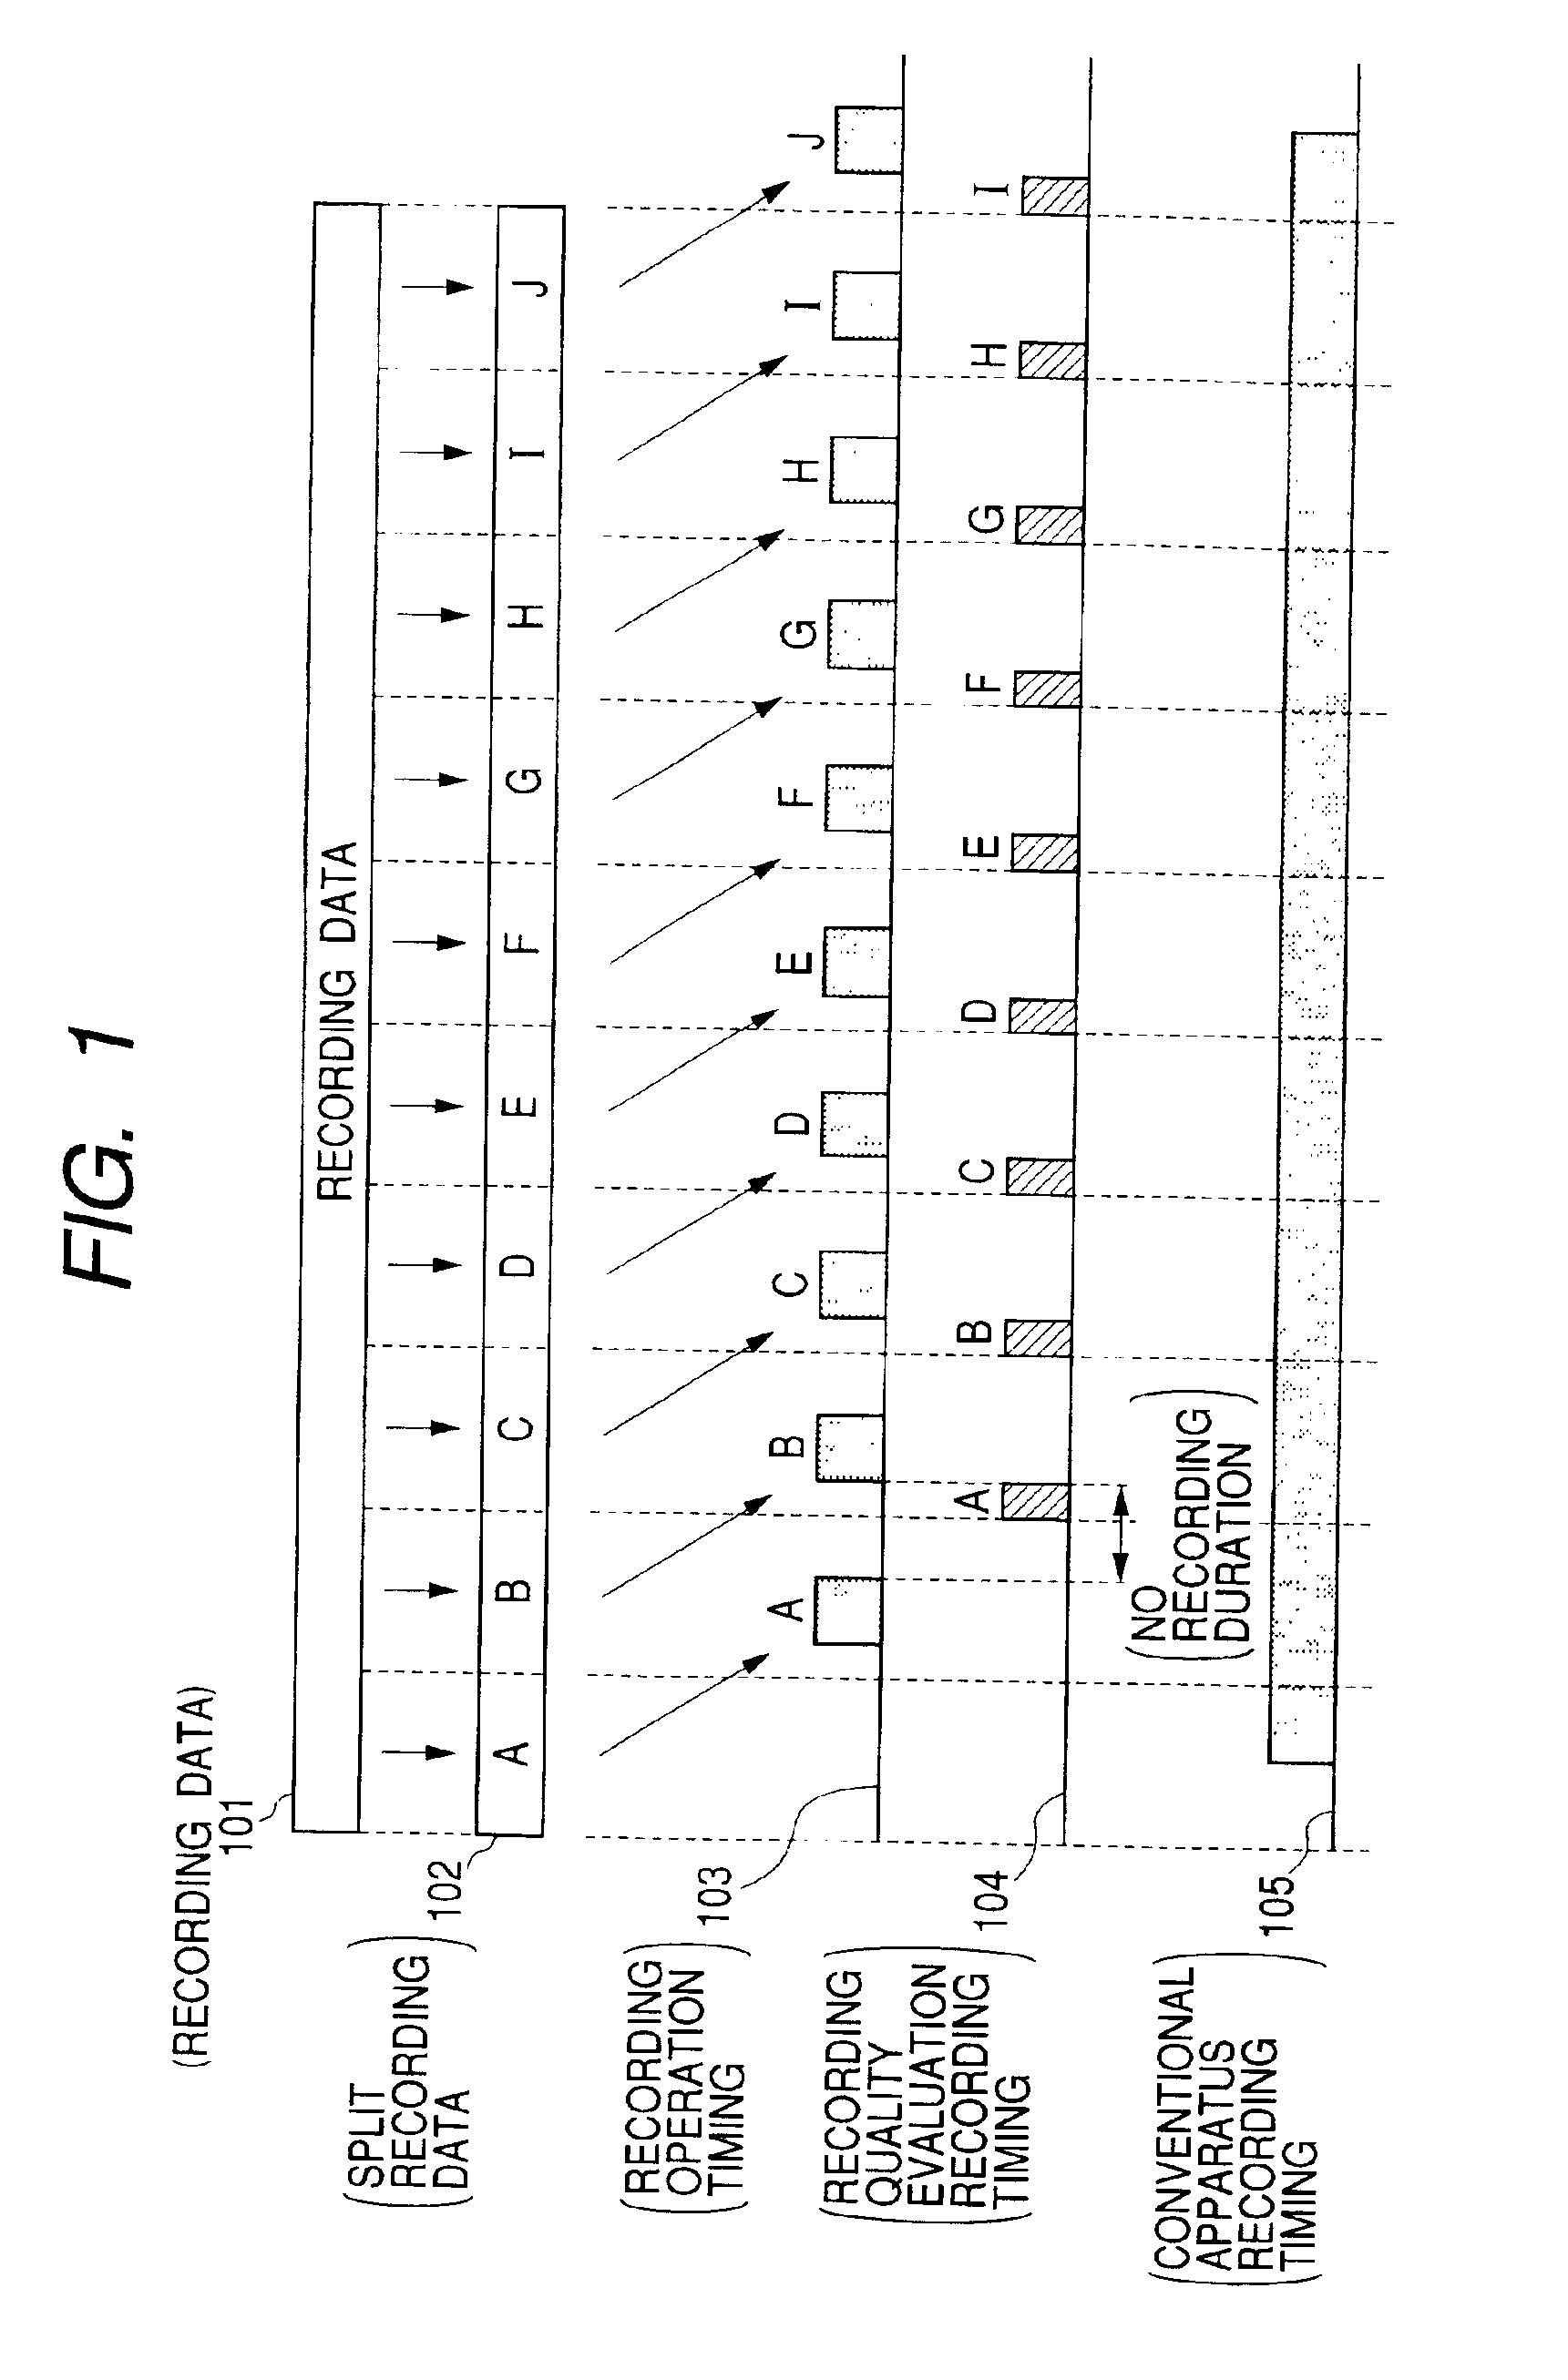 Optical disc recording method and optical disc drive